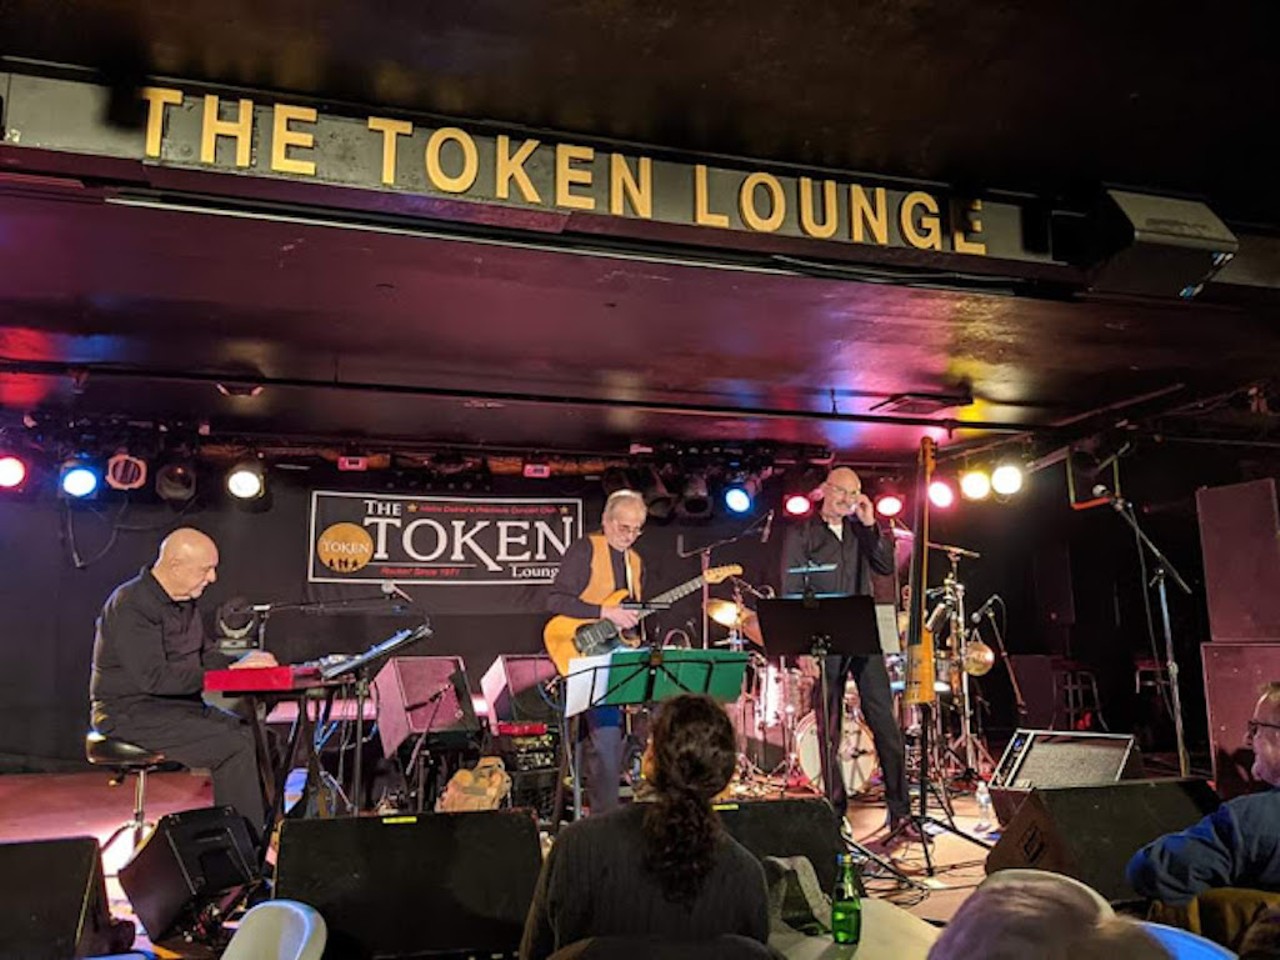 Token Lounge
28949 Joy Rd., Westland; tokenlounge.com
For more than 50 years, Token Lounge has been a place for live rock concerts. It can hold 600 guests.